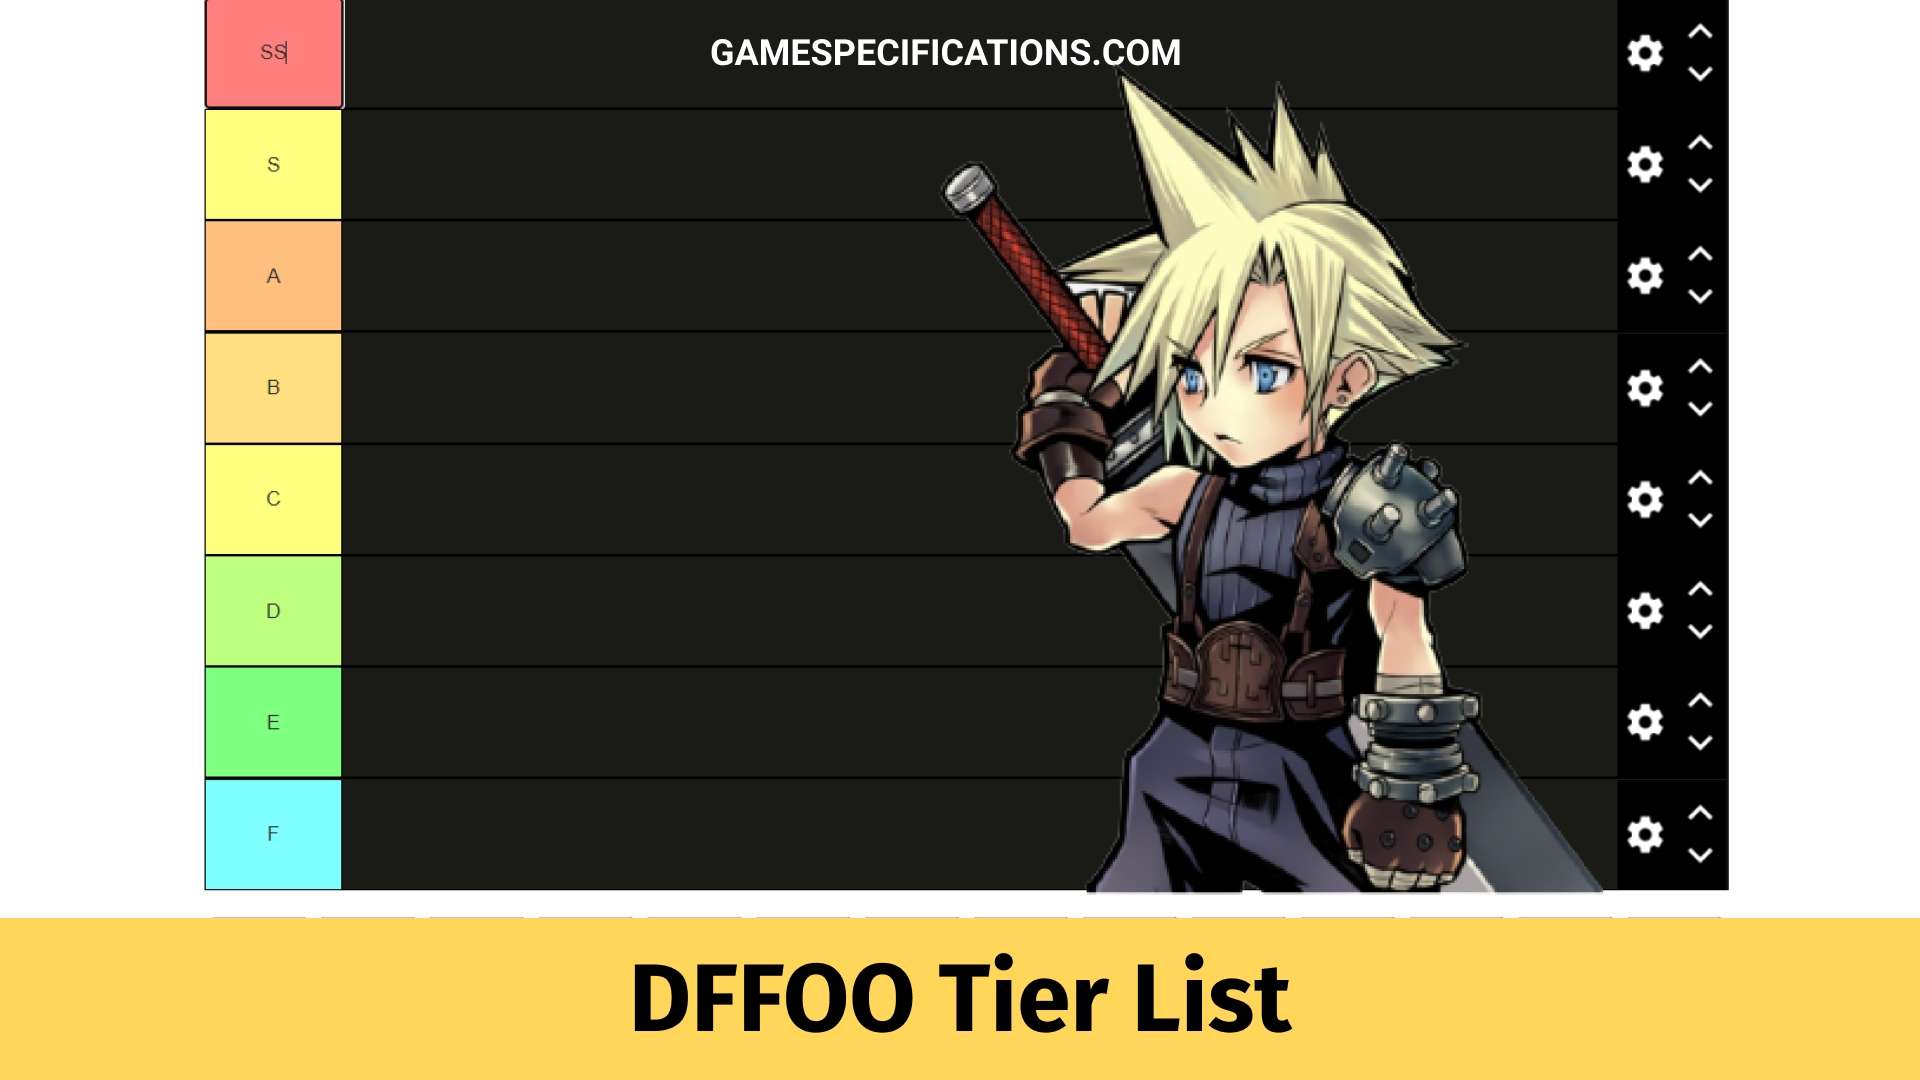 Dffoo Tier List July 2021 Game Specifications - roblox assassins tier list